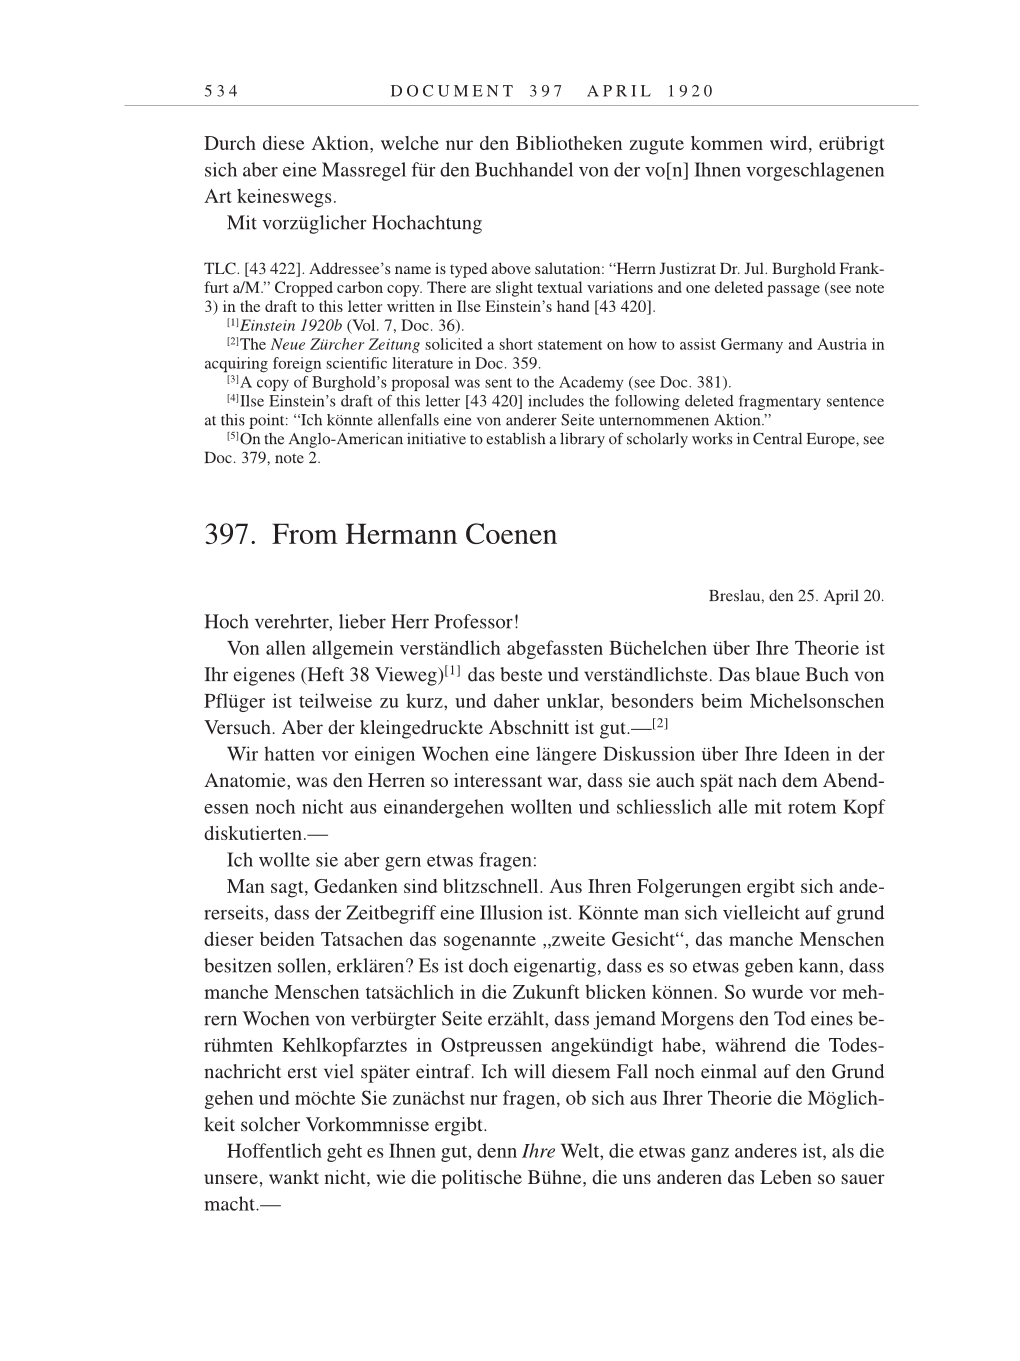 Volume 9: The Berlin Years: Correspondence January 1919-April 1920 page 534